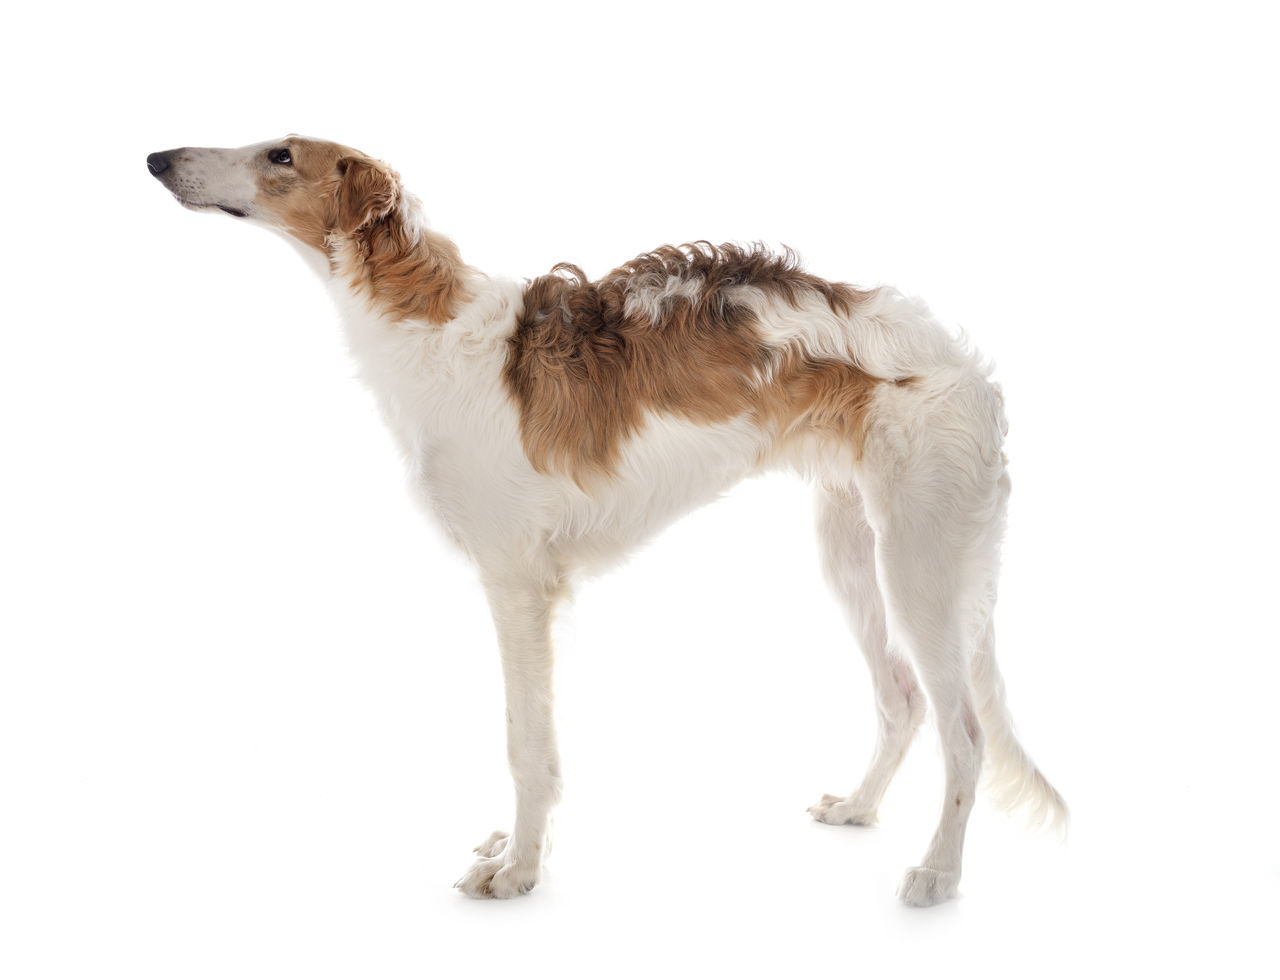 SIDE VIEW OF DOG OVER WHITE BACKGROUND